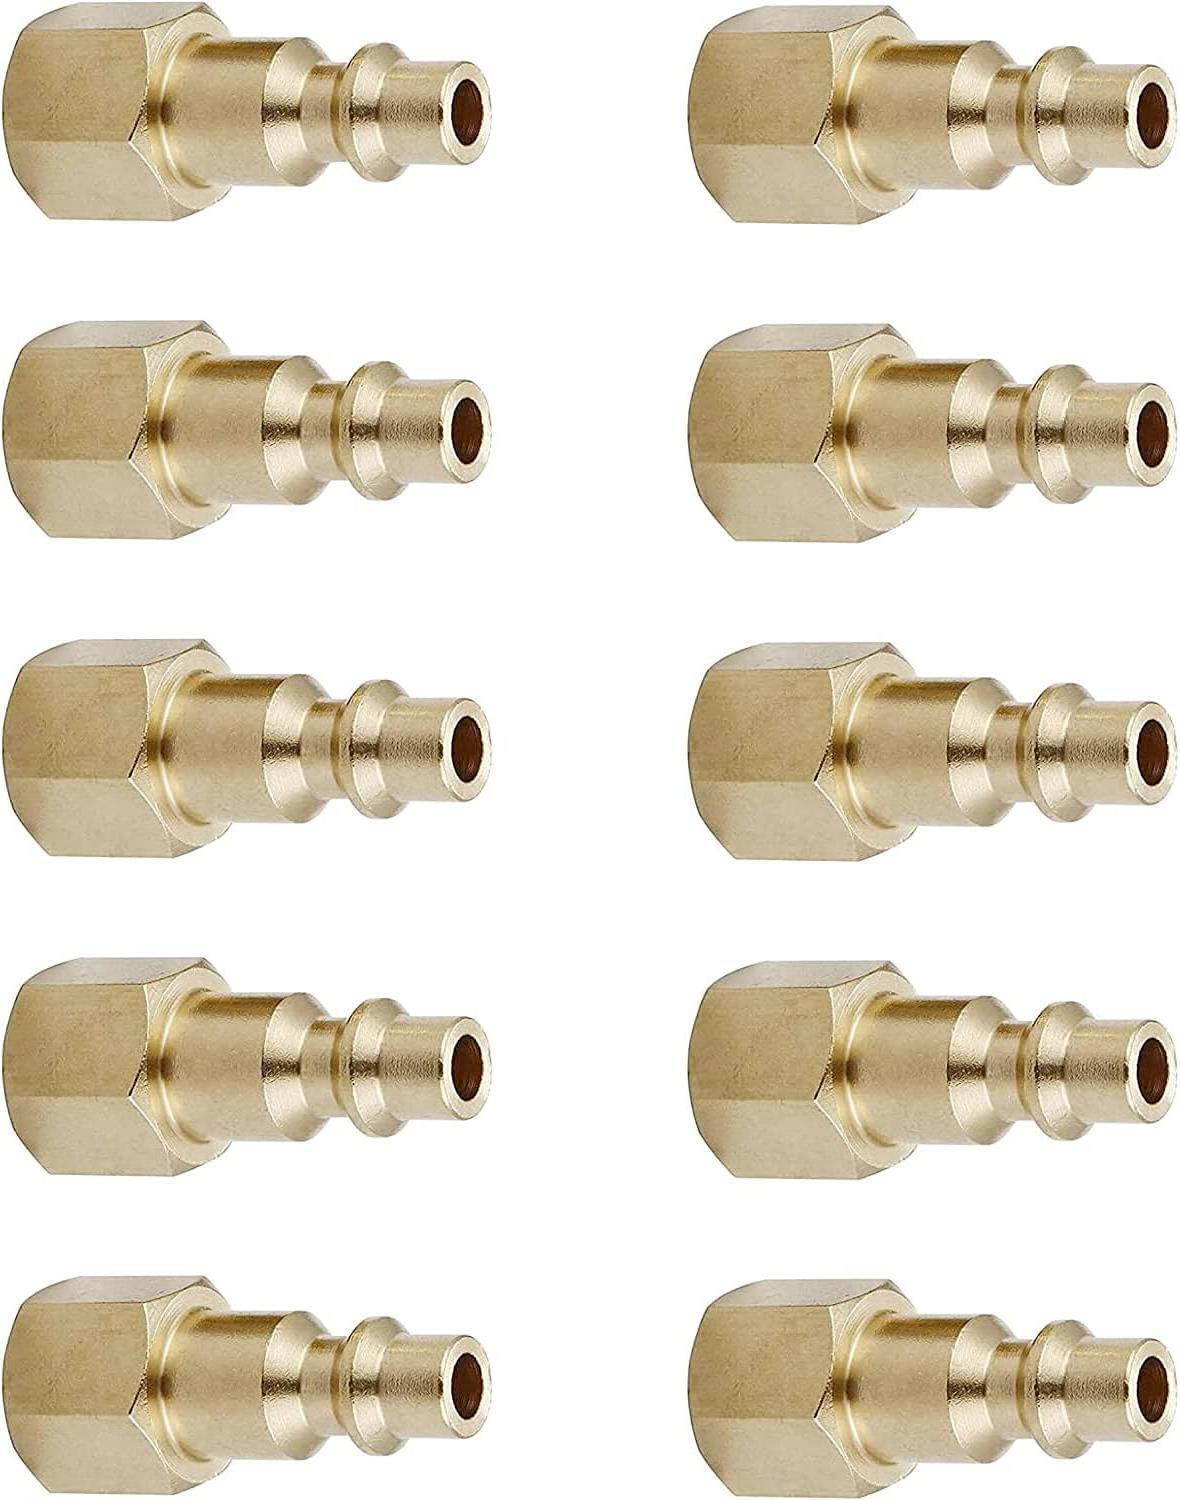 1/4-Inch Female Coupler Quick Connect, Air Hose & Air Coupler Plug - Pack of 10